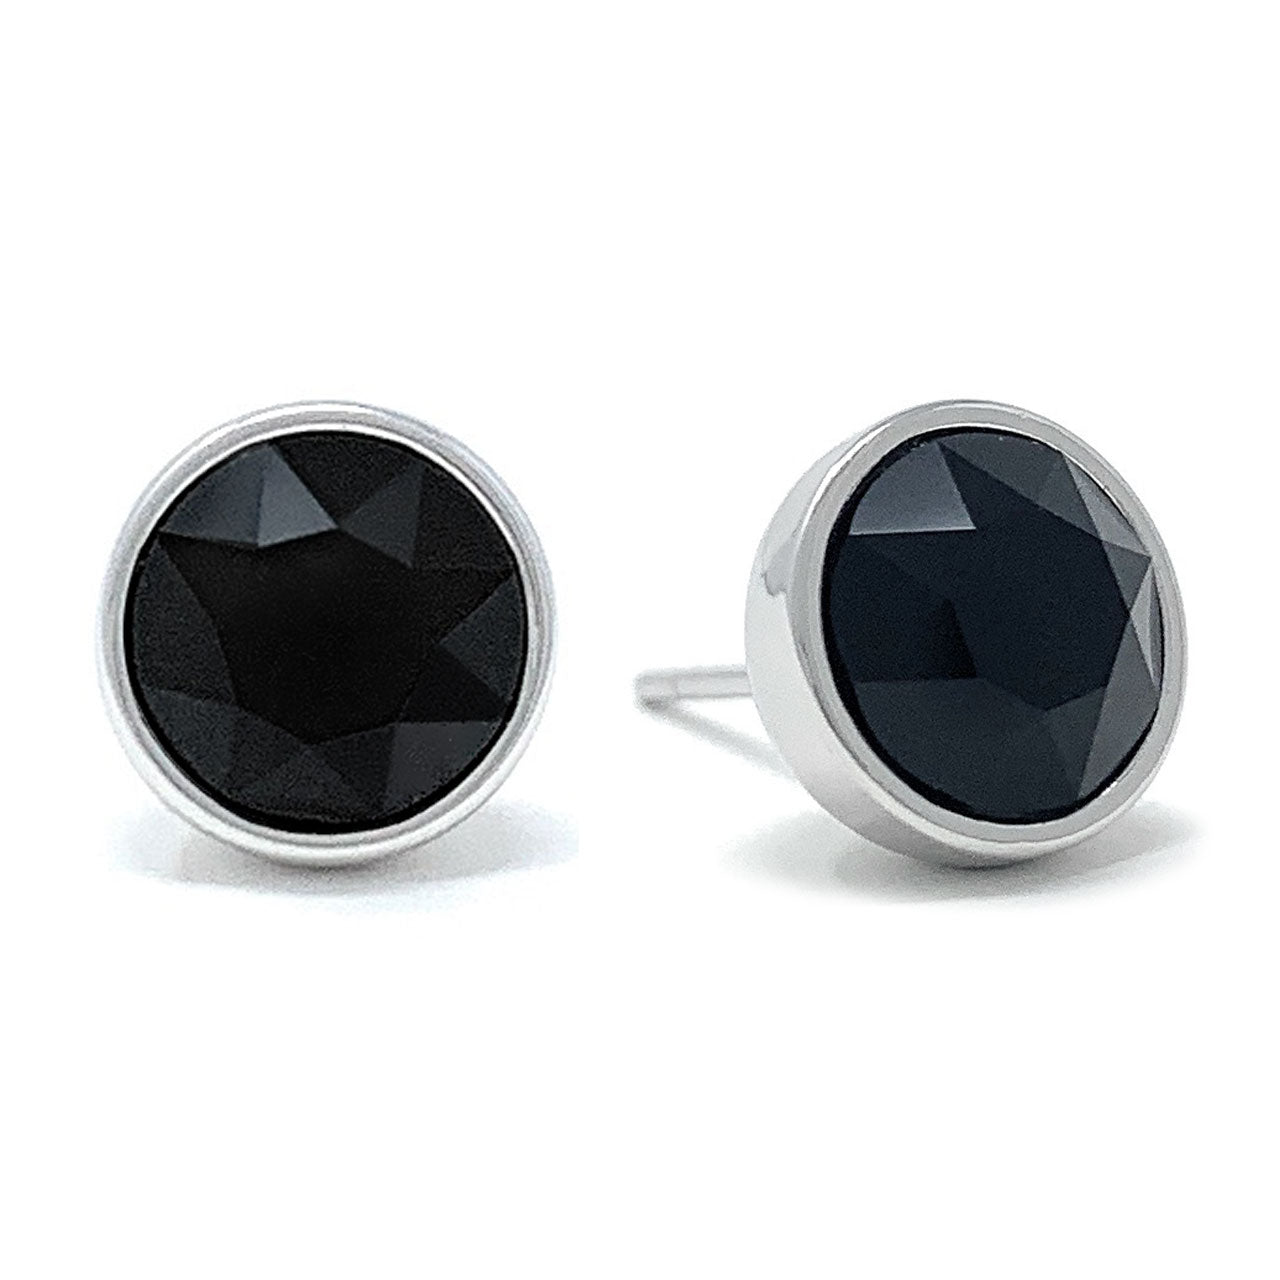 Harley Stud Earrings with Black Jet Round Crystals from Swarovski Silver Toned Rhodium Plated - Ed Heart